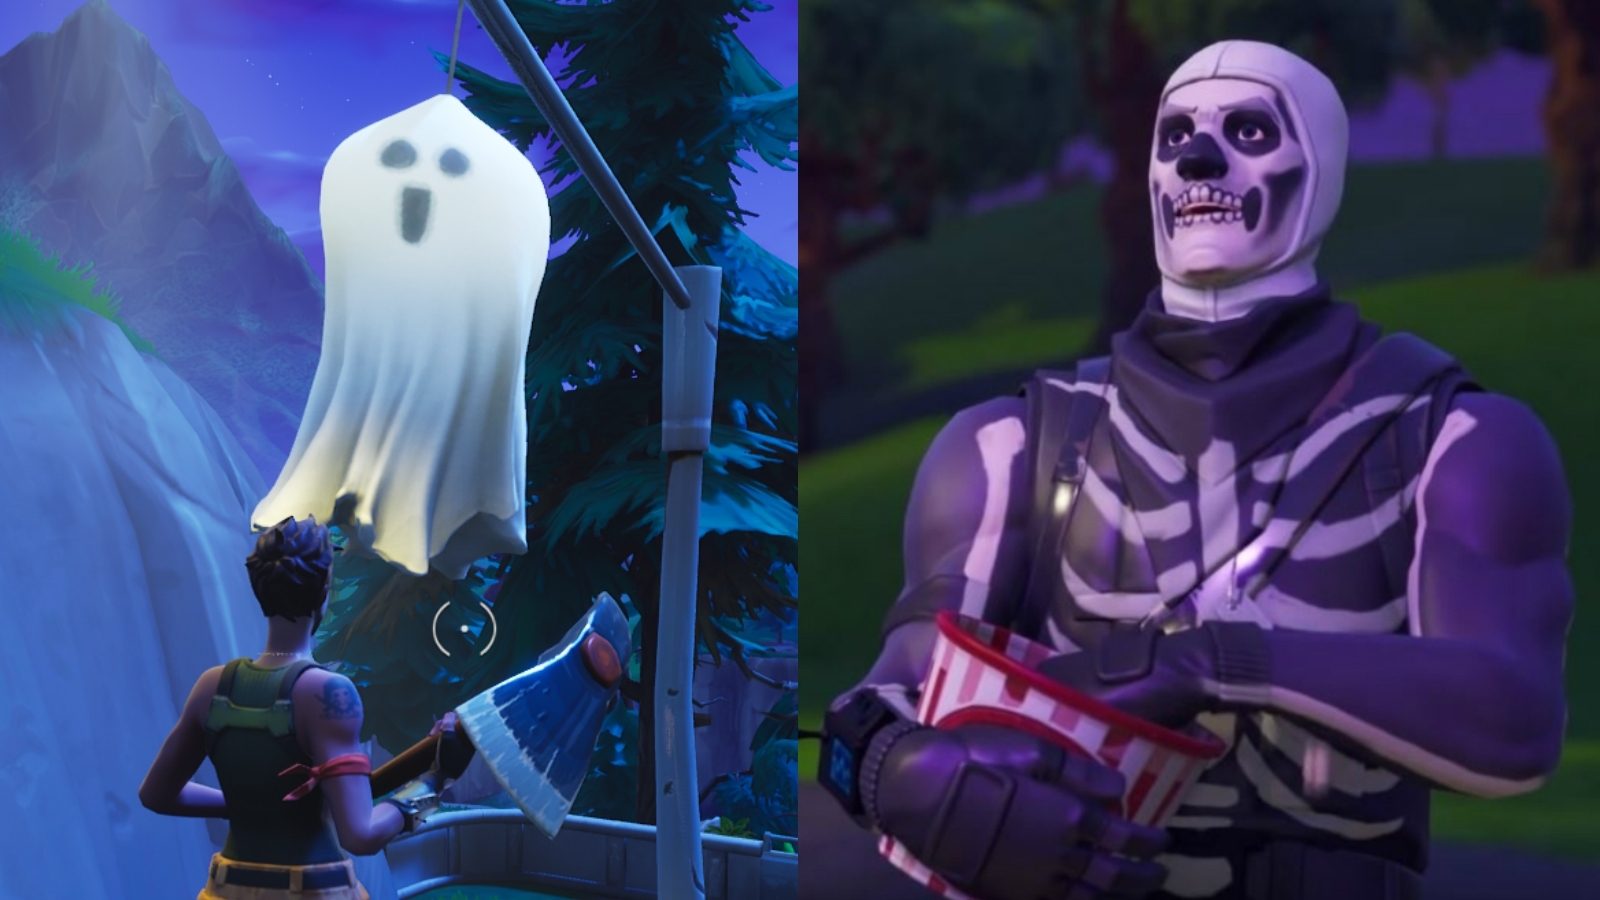 More Fortnite Halloween Props Have Been Revealed